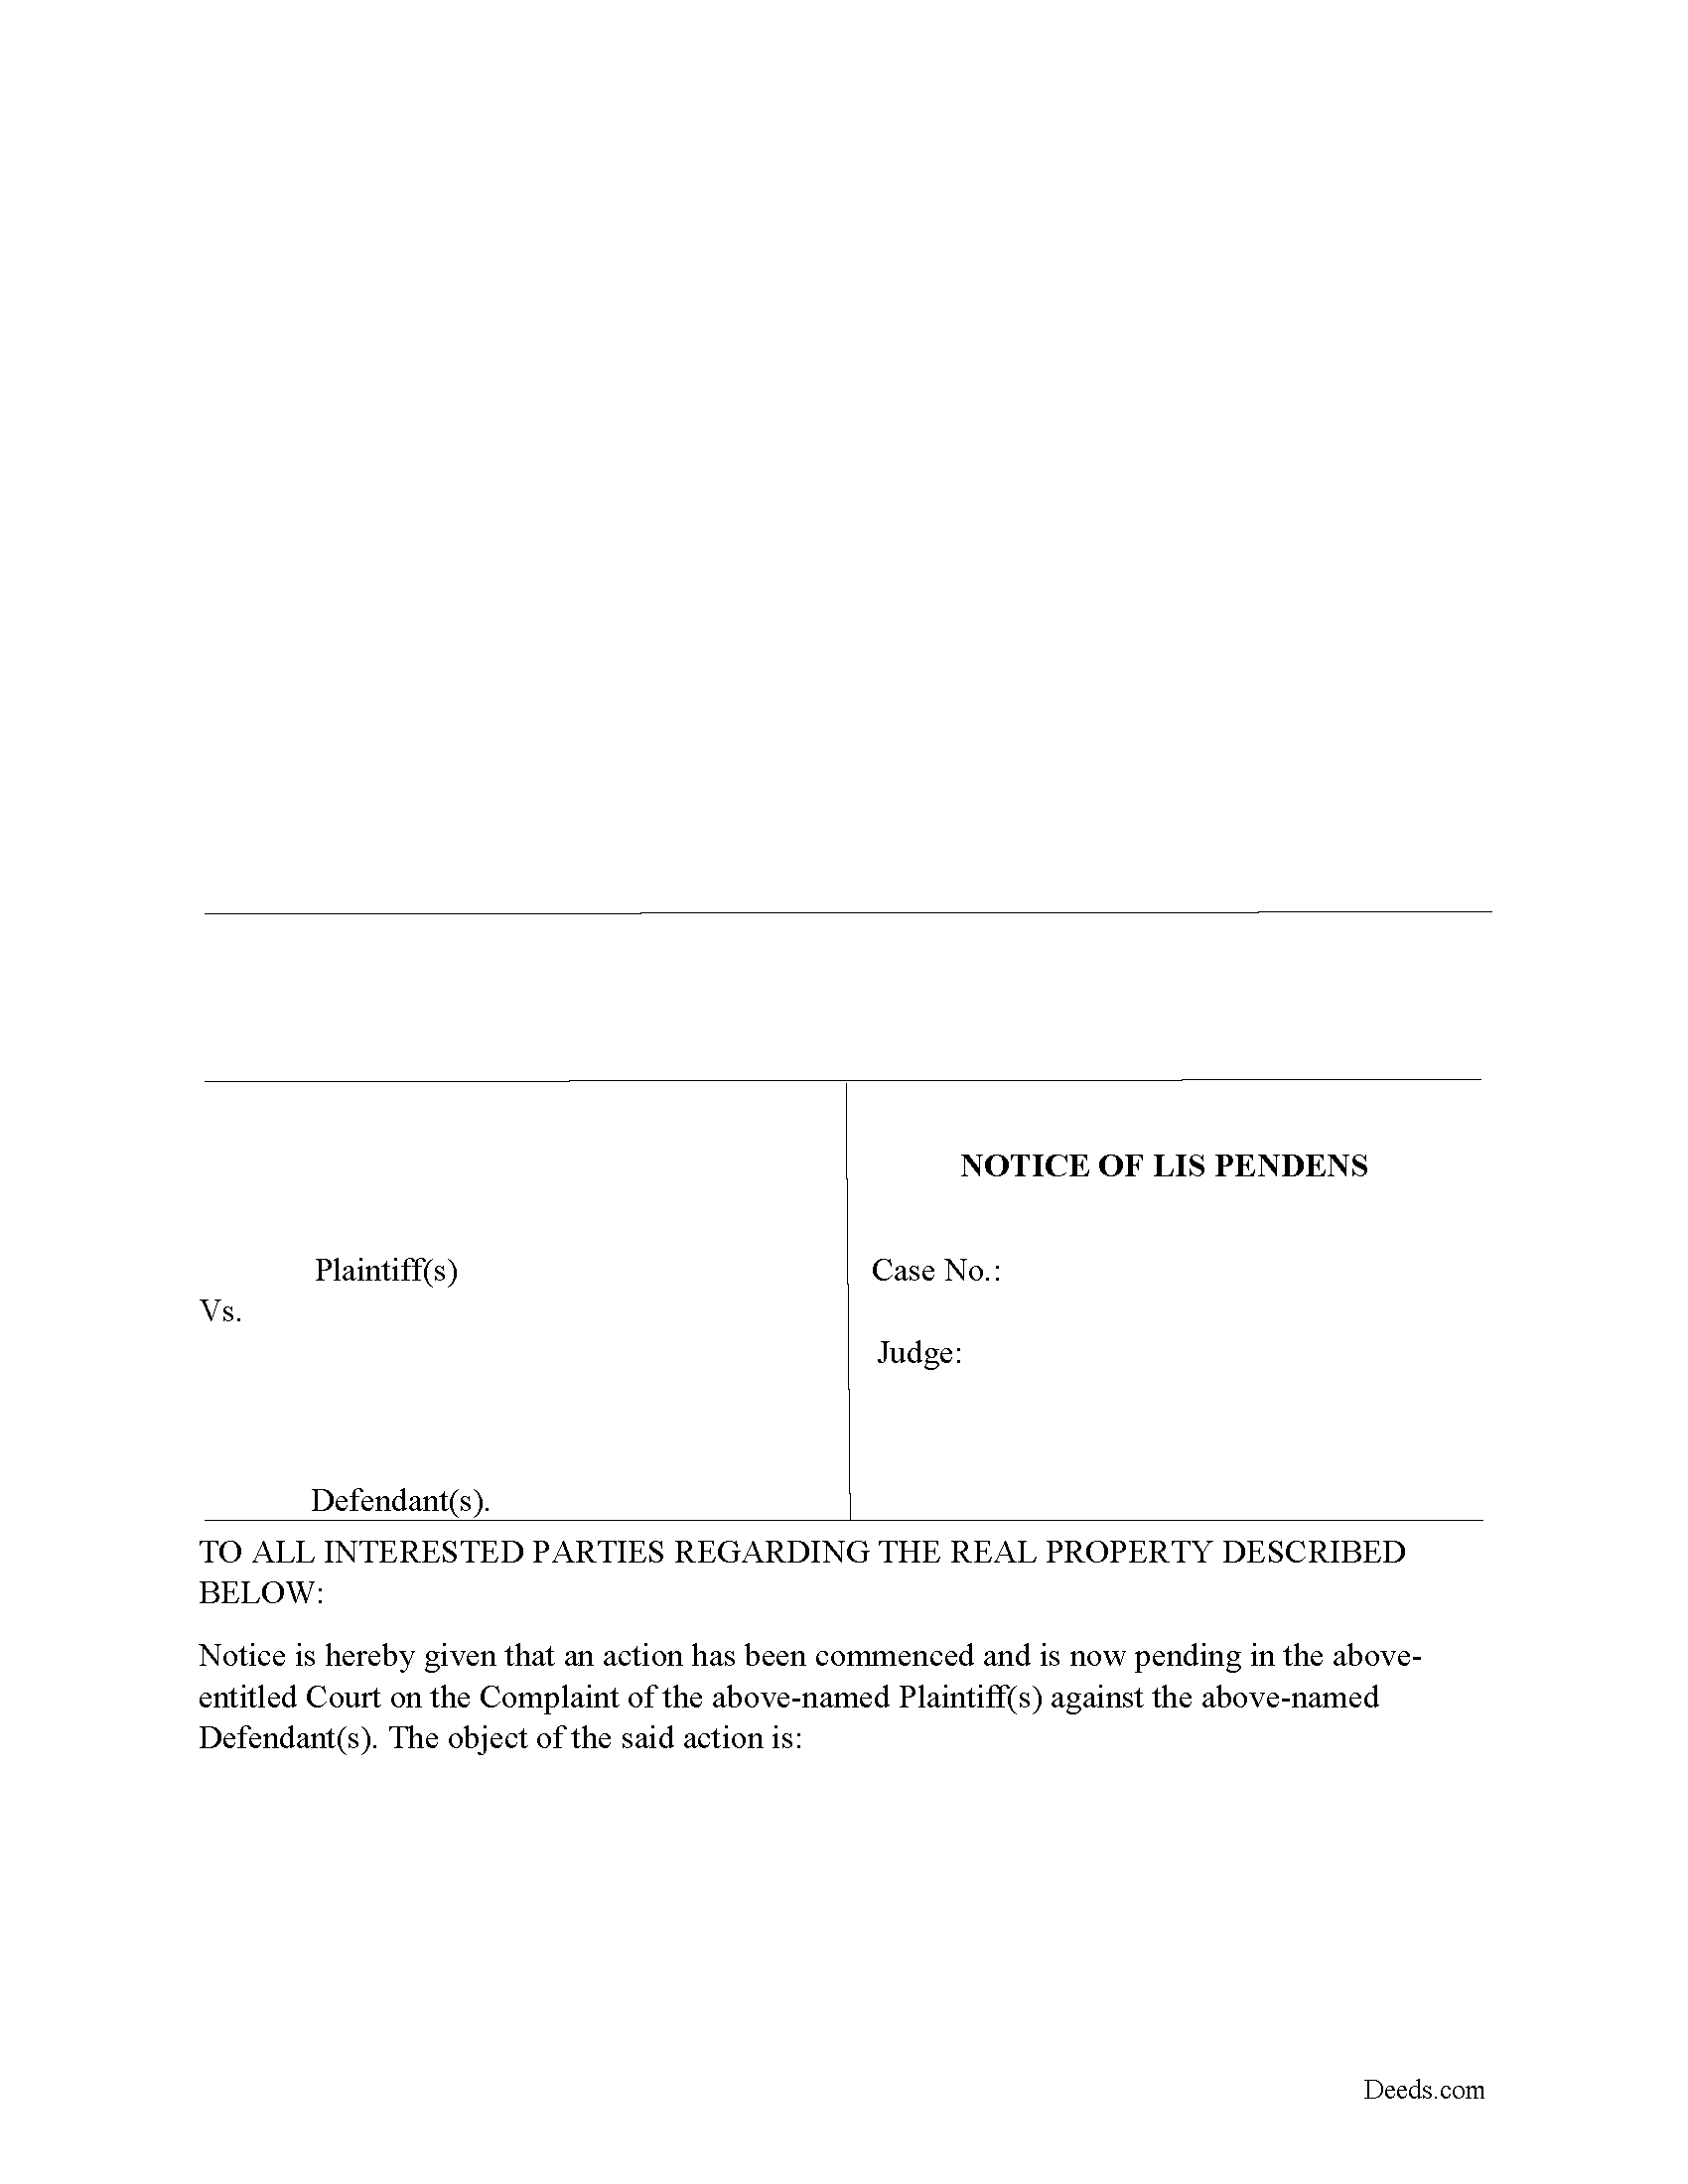 Notice of Lis Pendens Form